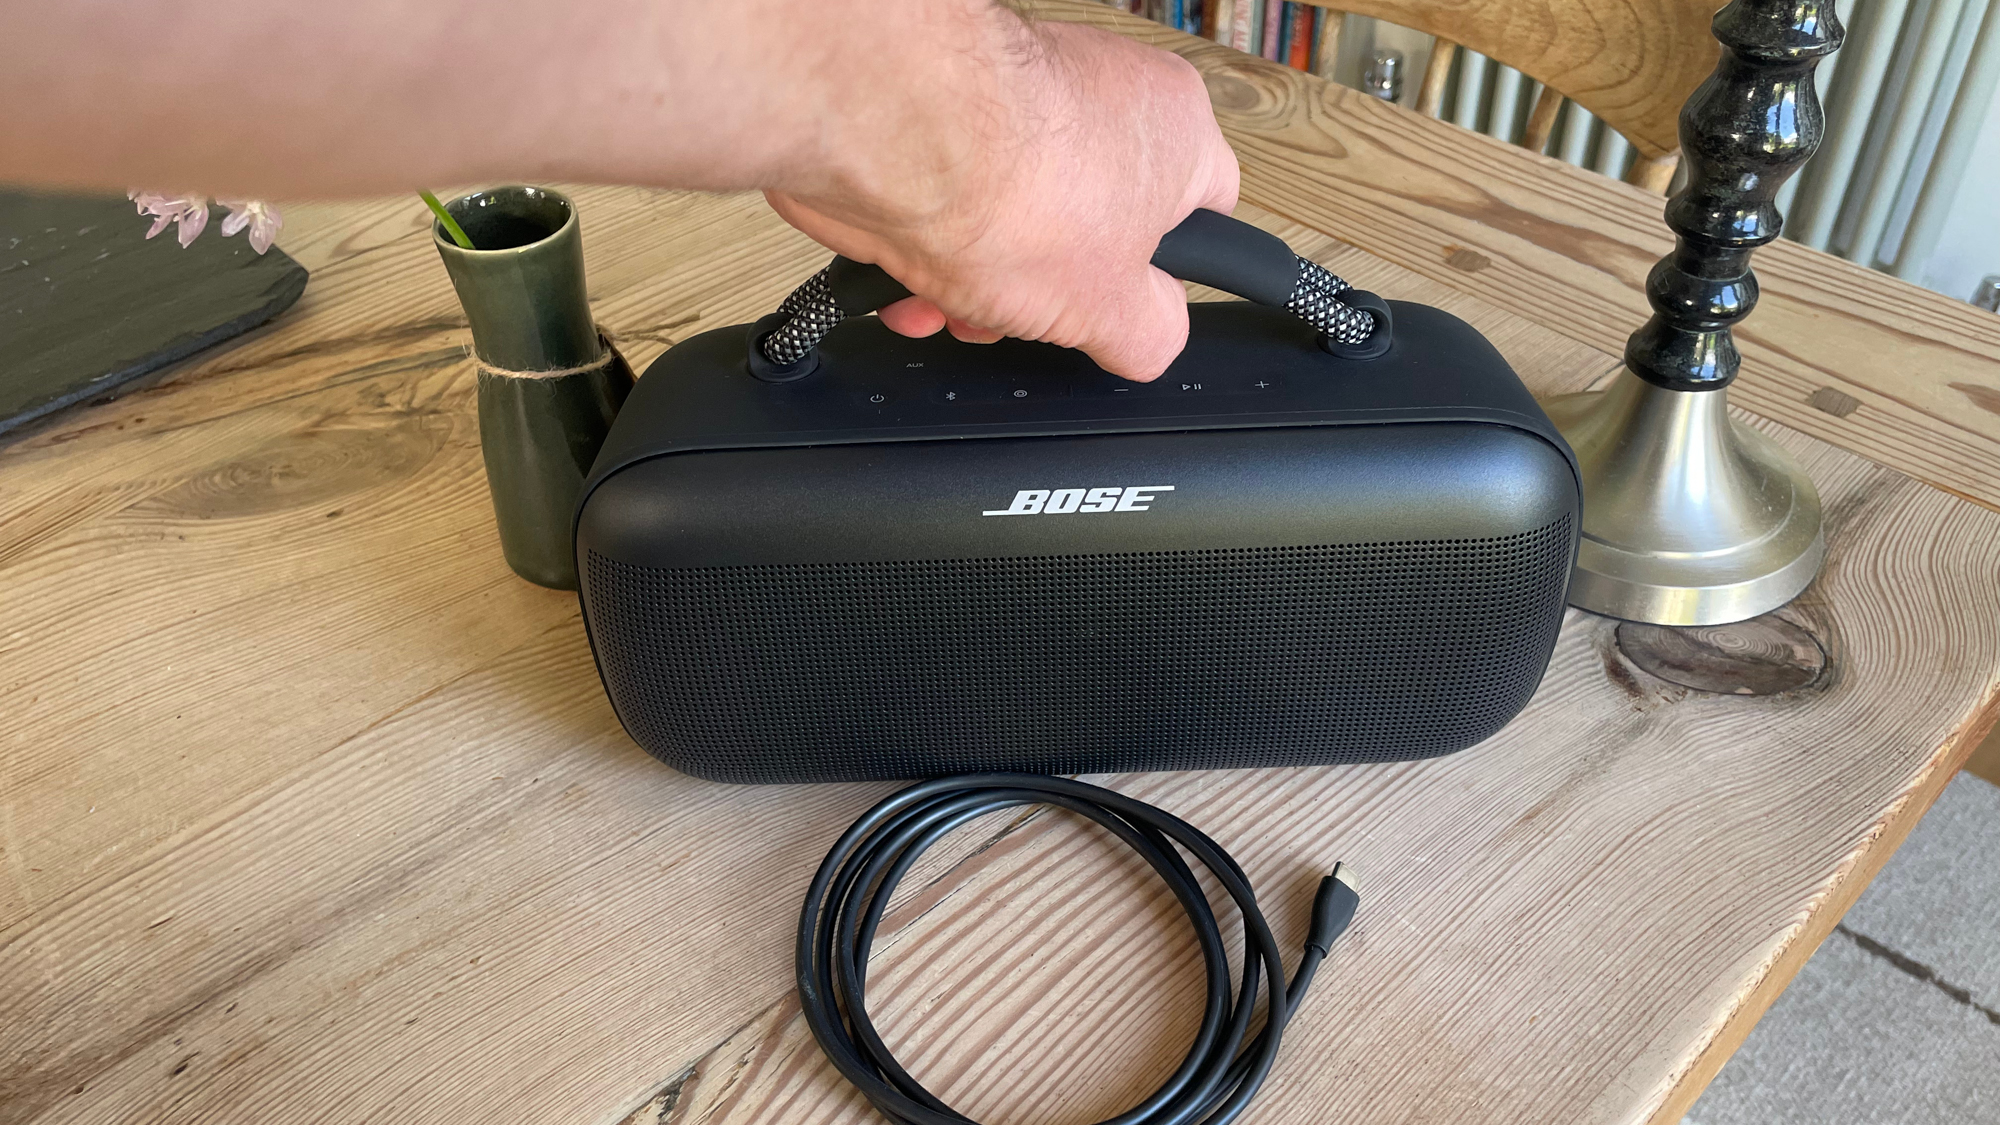 Bose SoundLink Max being held by carry handle above kitchen table